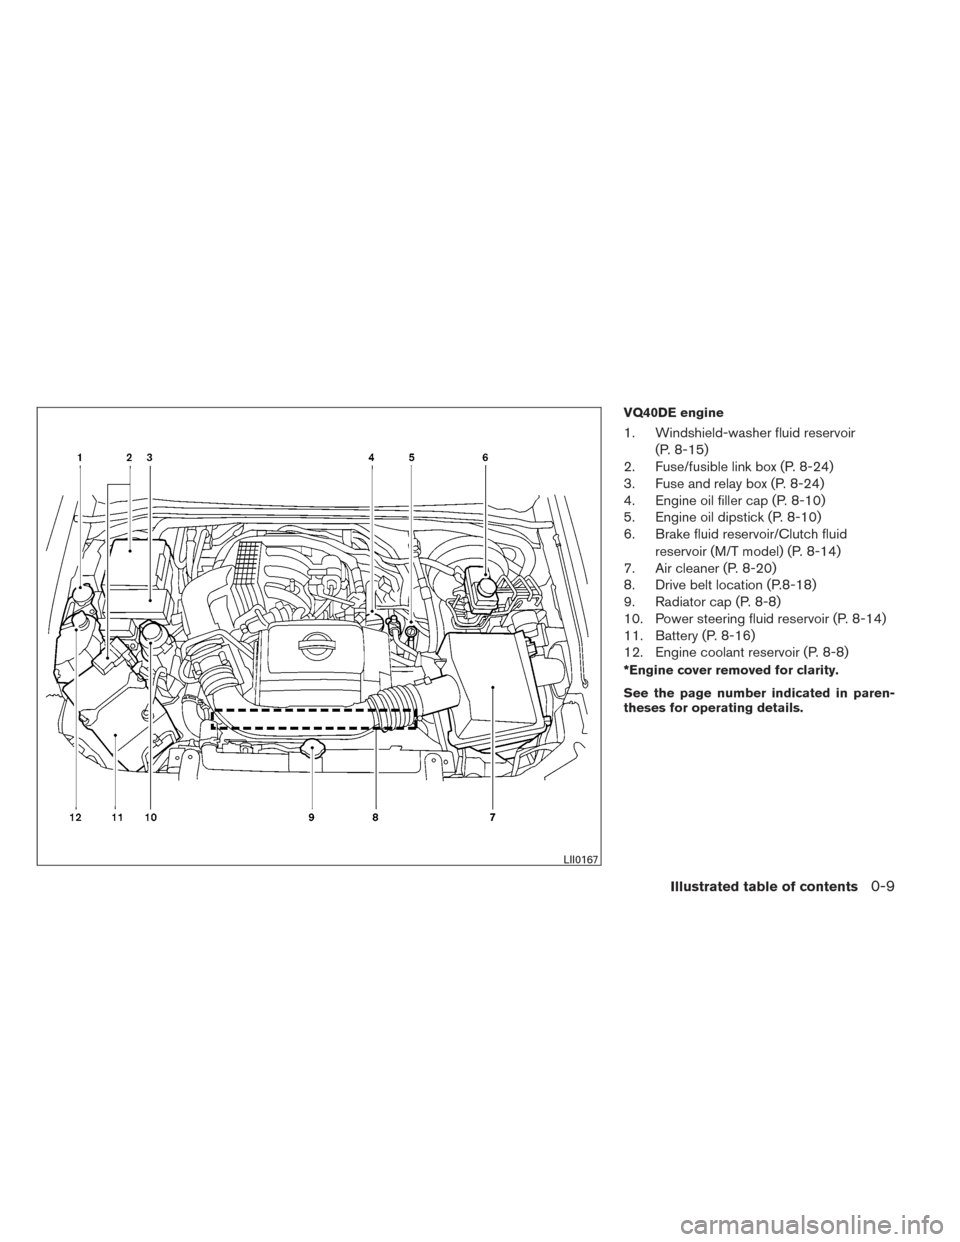 NISSAN FRONTIER 2014 D23 / 3.G User Guide VQ40DE engine
1. Windshield-washer fluid reservoir(P. 8-15)
2. Fuse/fusible link box (P. 8-24)
3. Fuse and relay box (P. 8-24)
4. Engine oil filler cap (P. 8-10)
5. Engine oil dipstick (P. 8-10)
6. Br